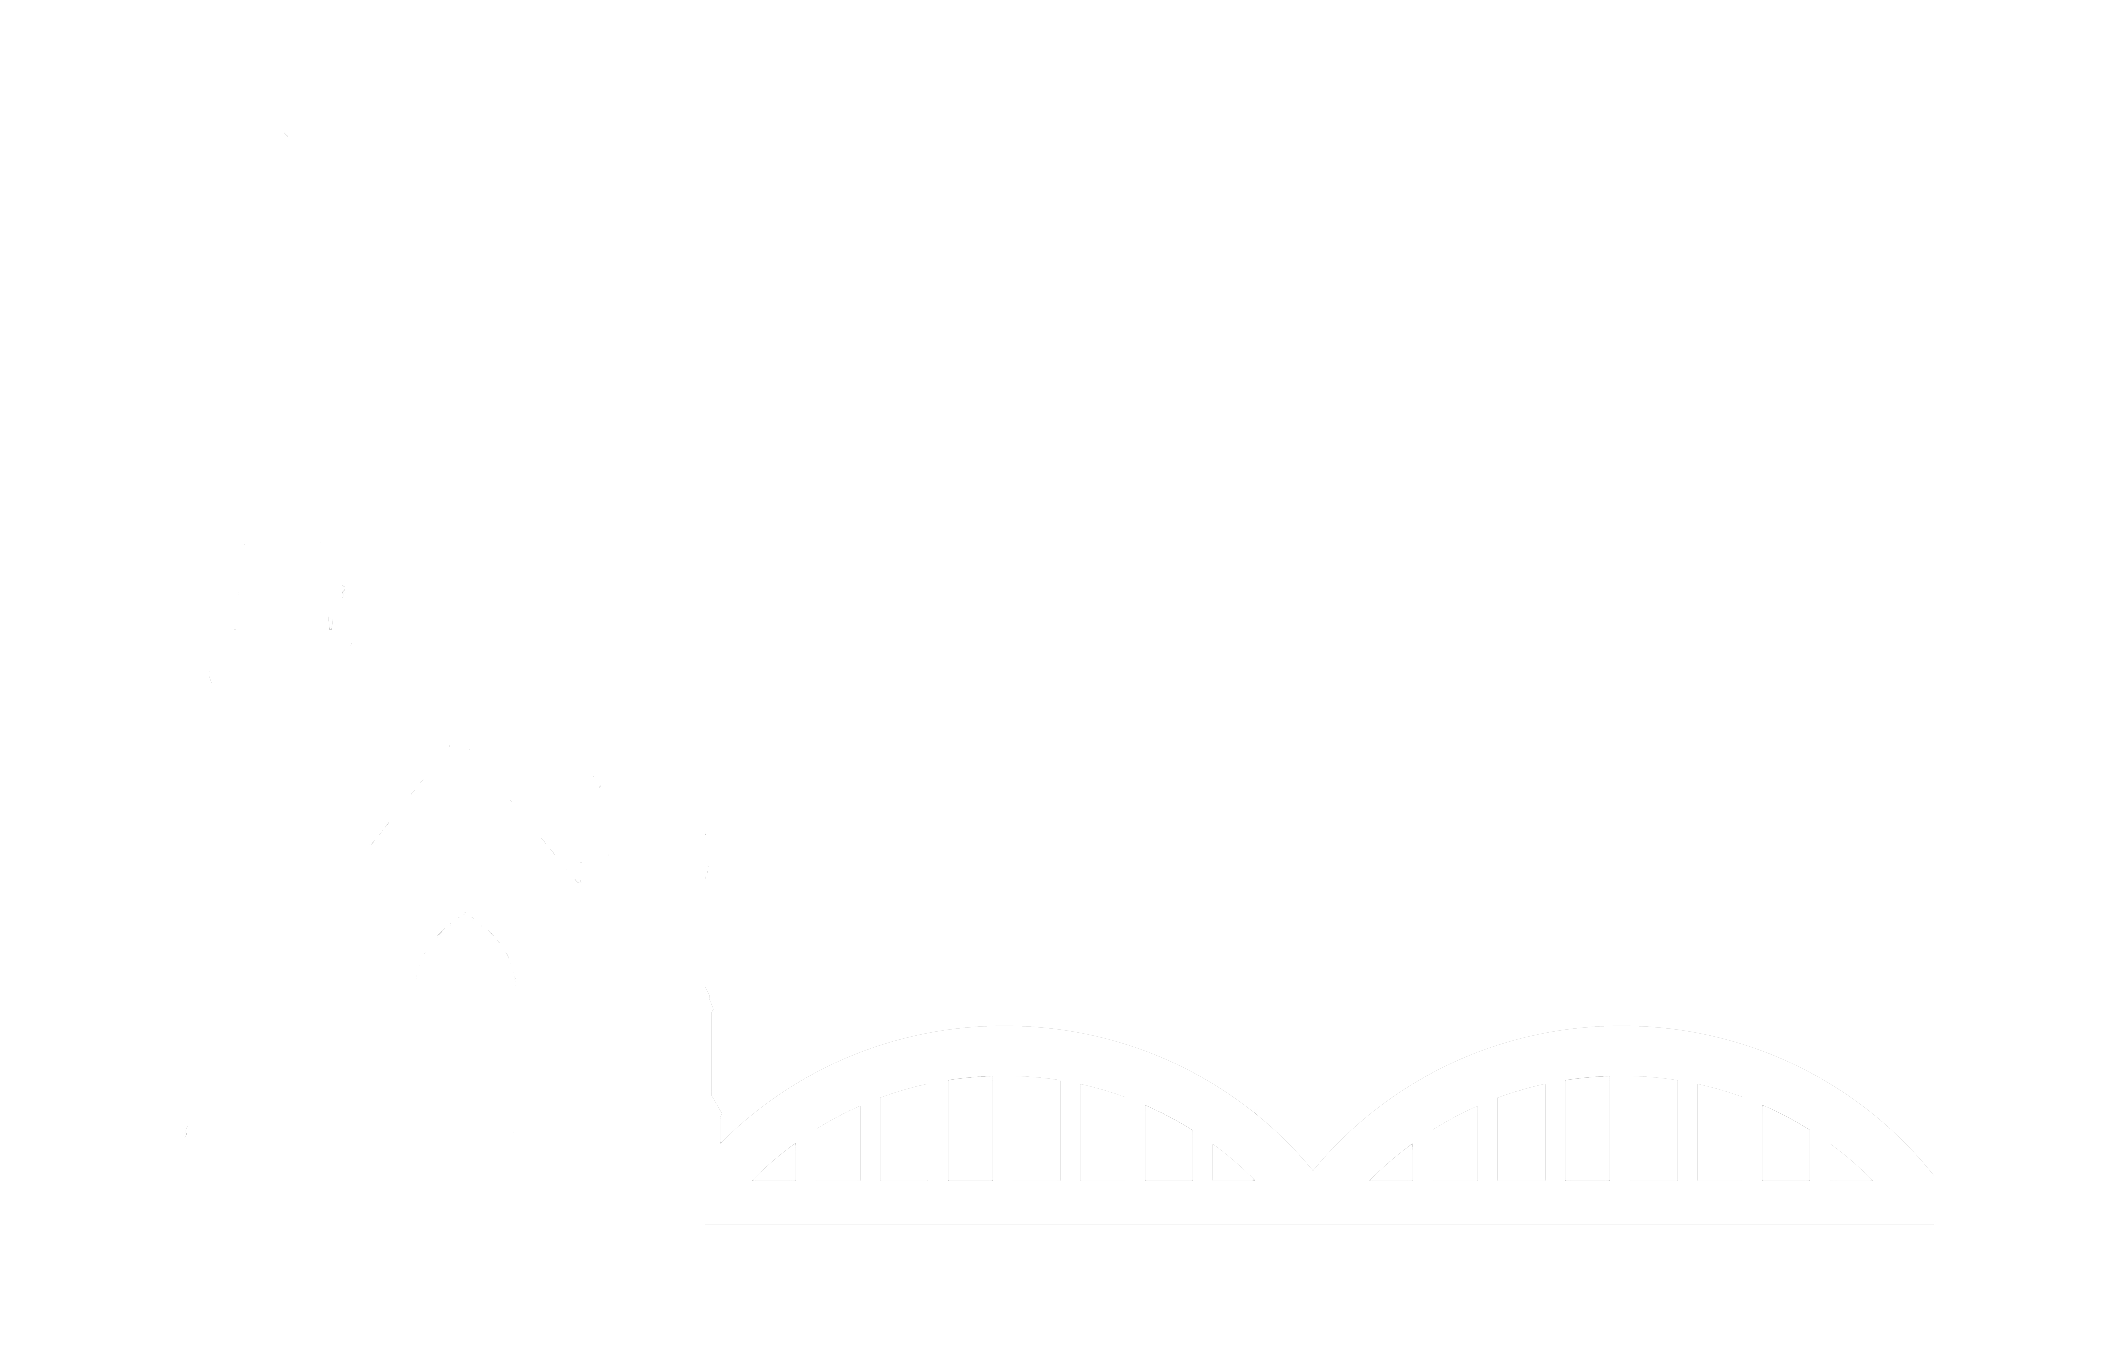 Return to Central